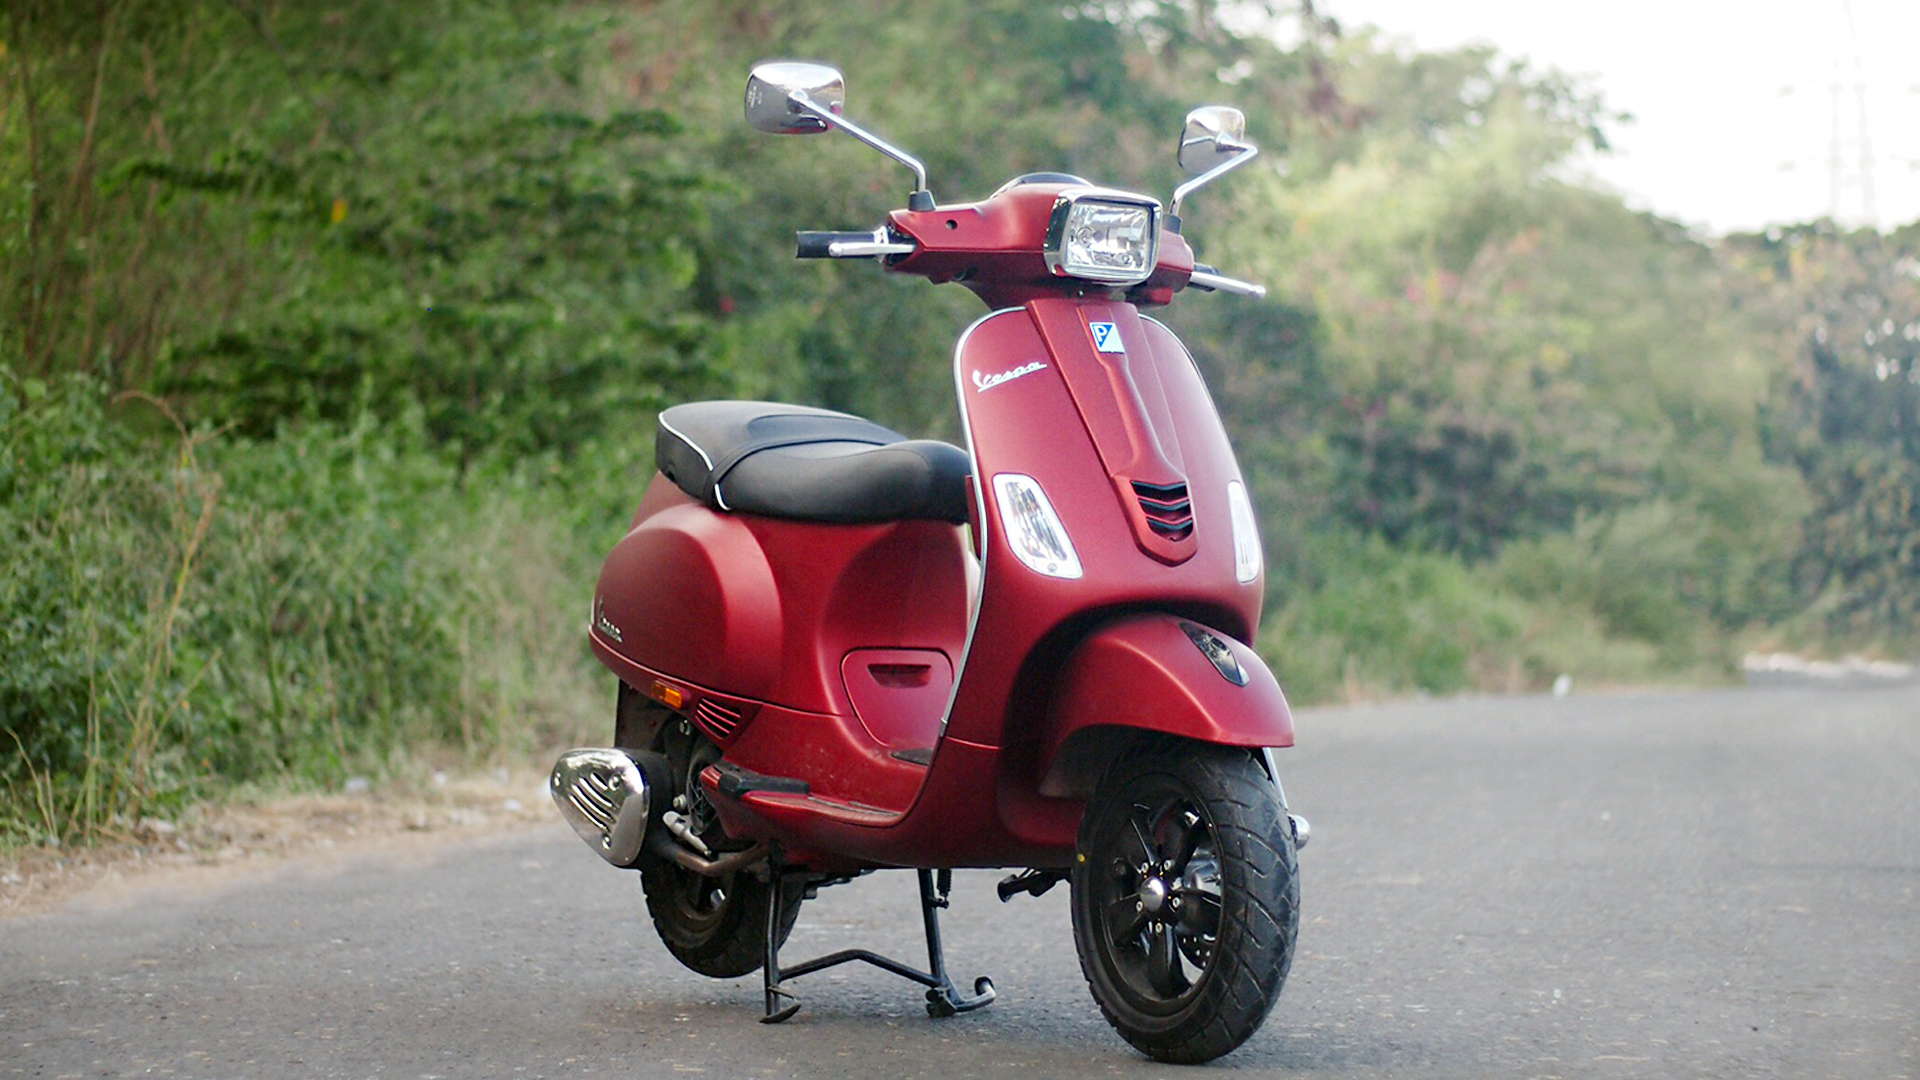 Vespa Sxl 15 125 Price Mileage Reviews Specification Gallery Overdrive